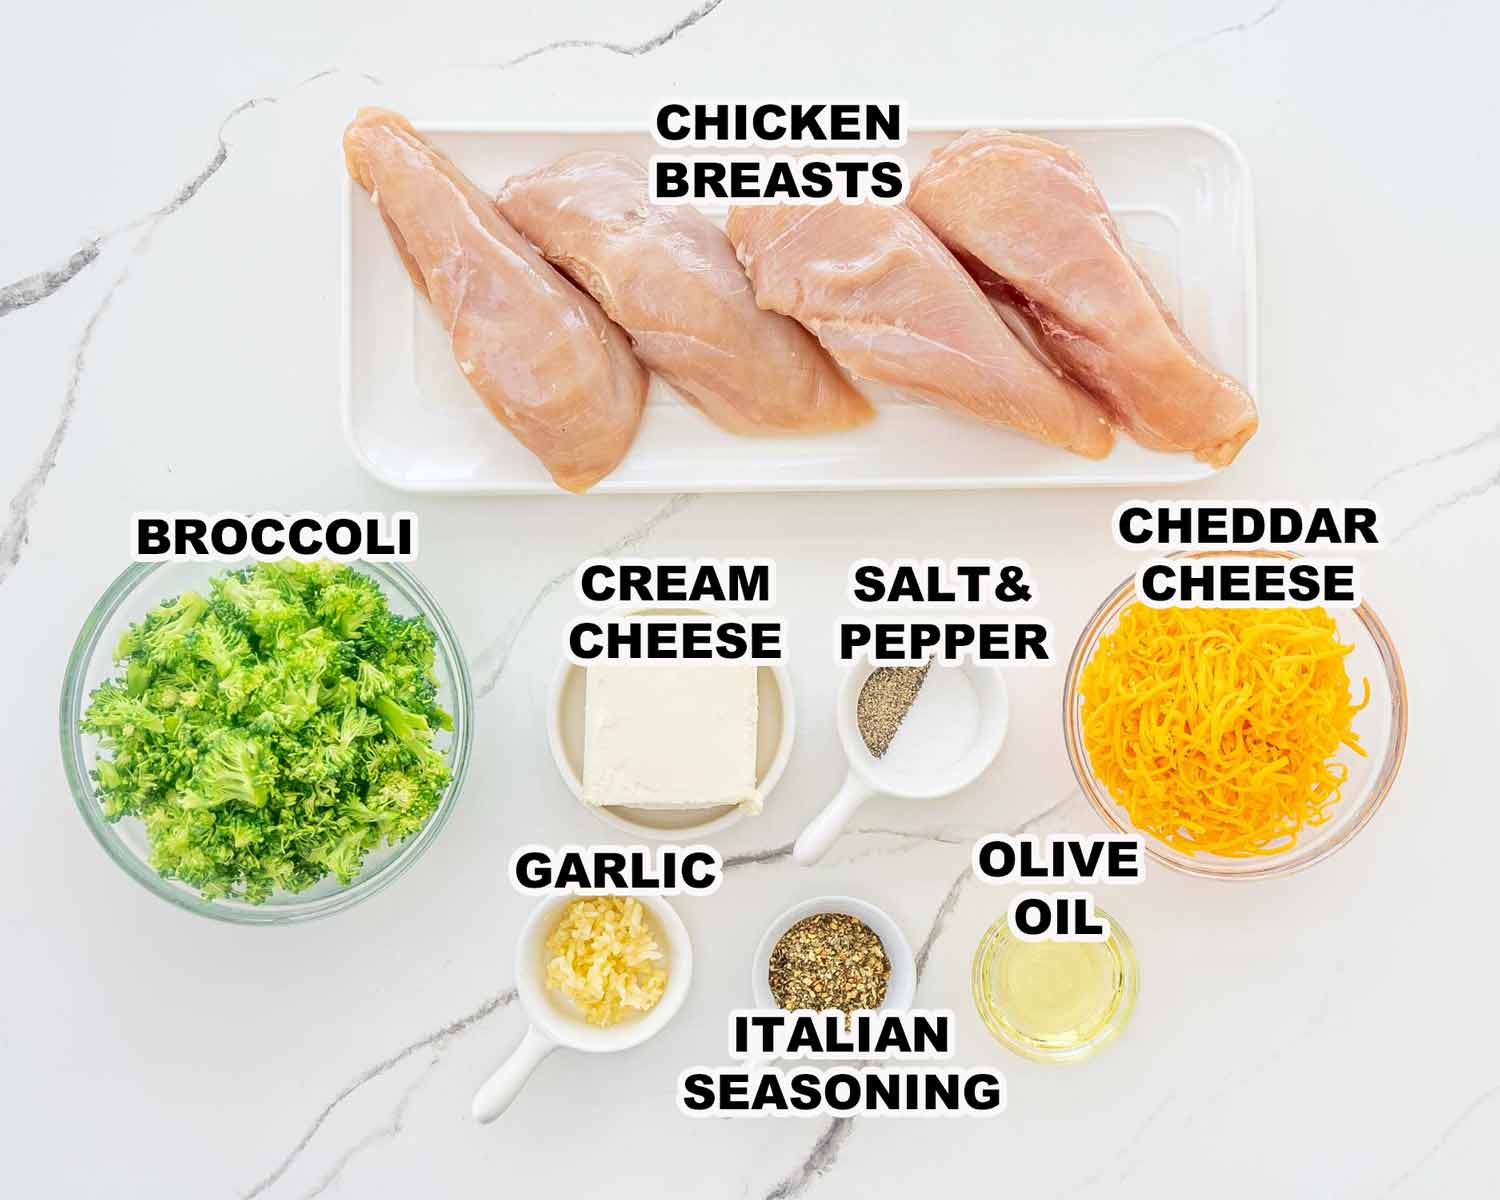 ingredients needed to make broccoli and cheddar stuffed chicken breast.